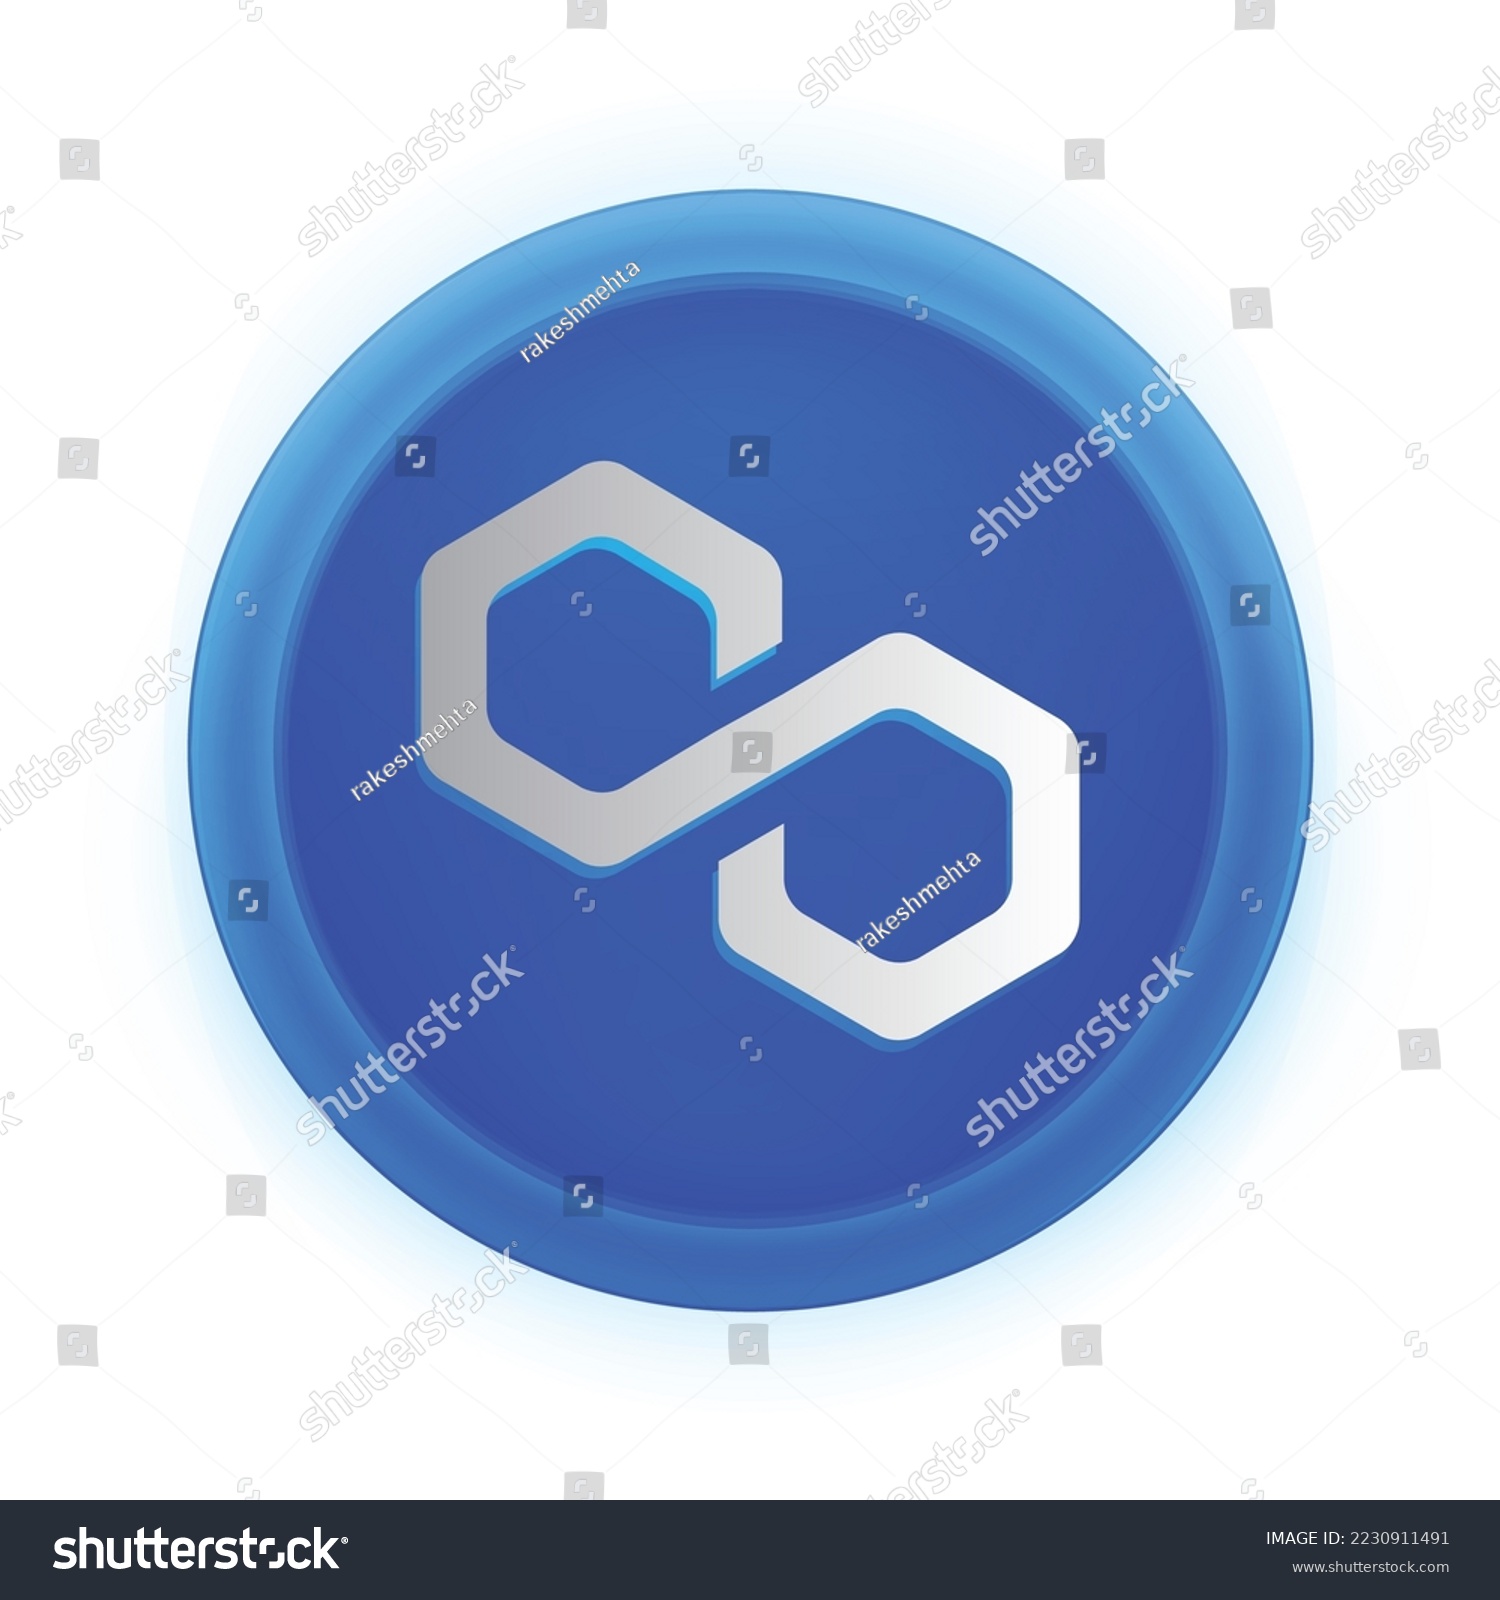 SVG of Polygon (MATIC) crypto logo isolated on white background. MATIC Cryptocurrency coin token vector svg